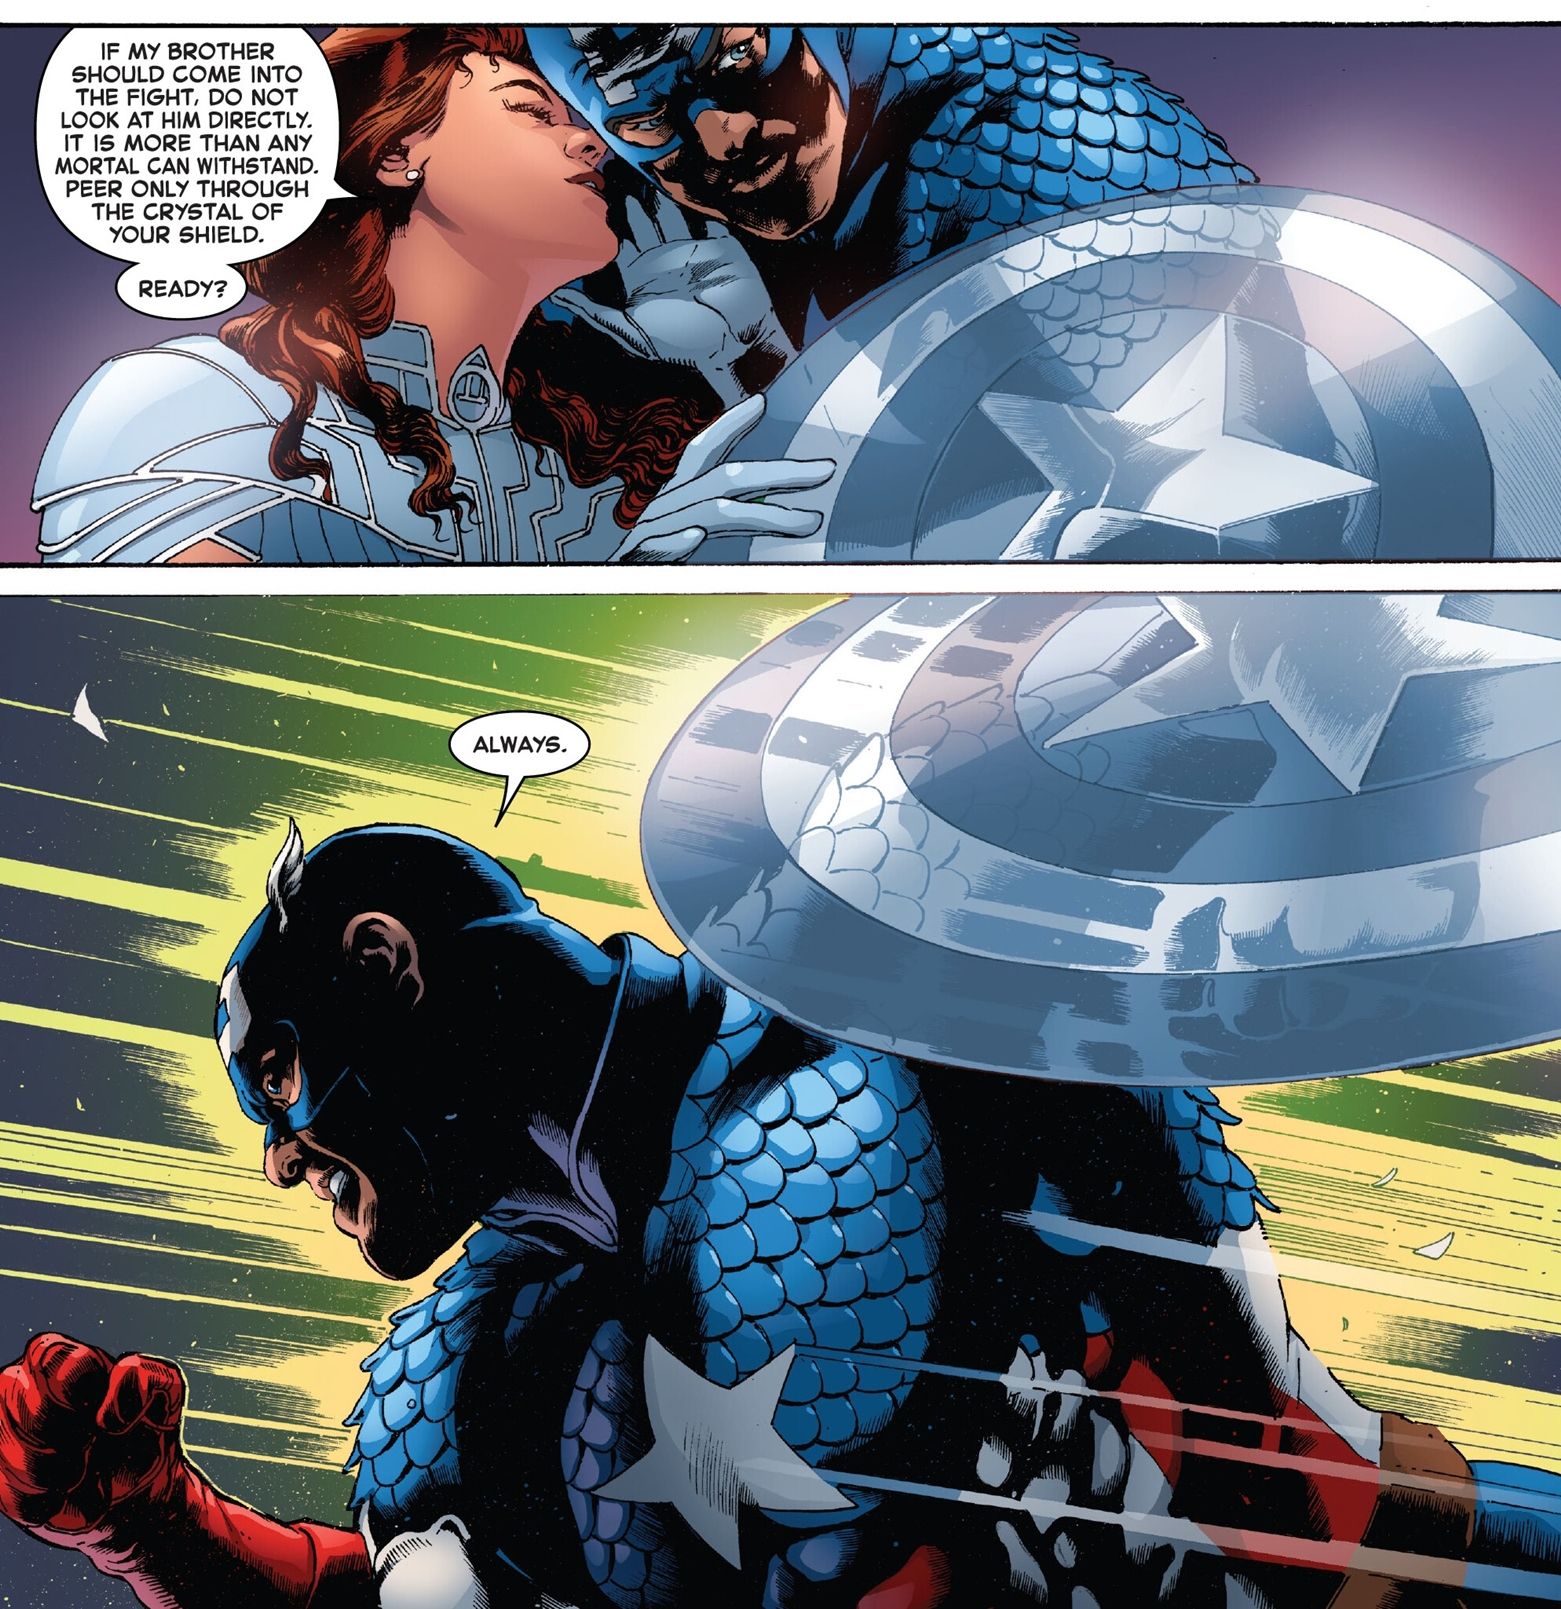 Captain America is armed with a transparent shield and prepares to face a battle with Death 